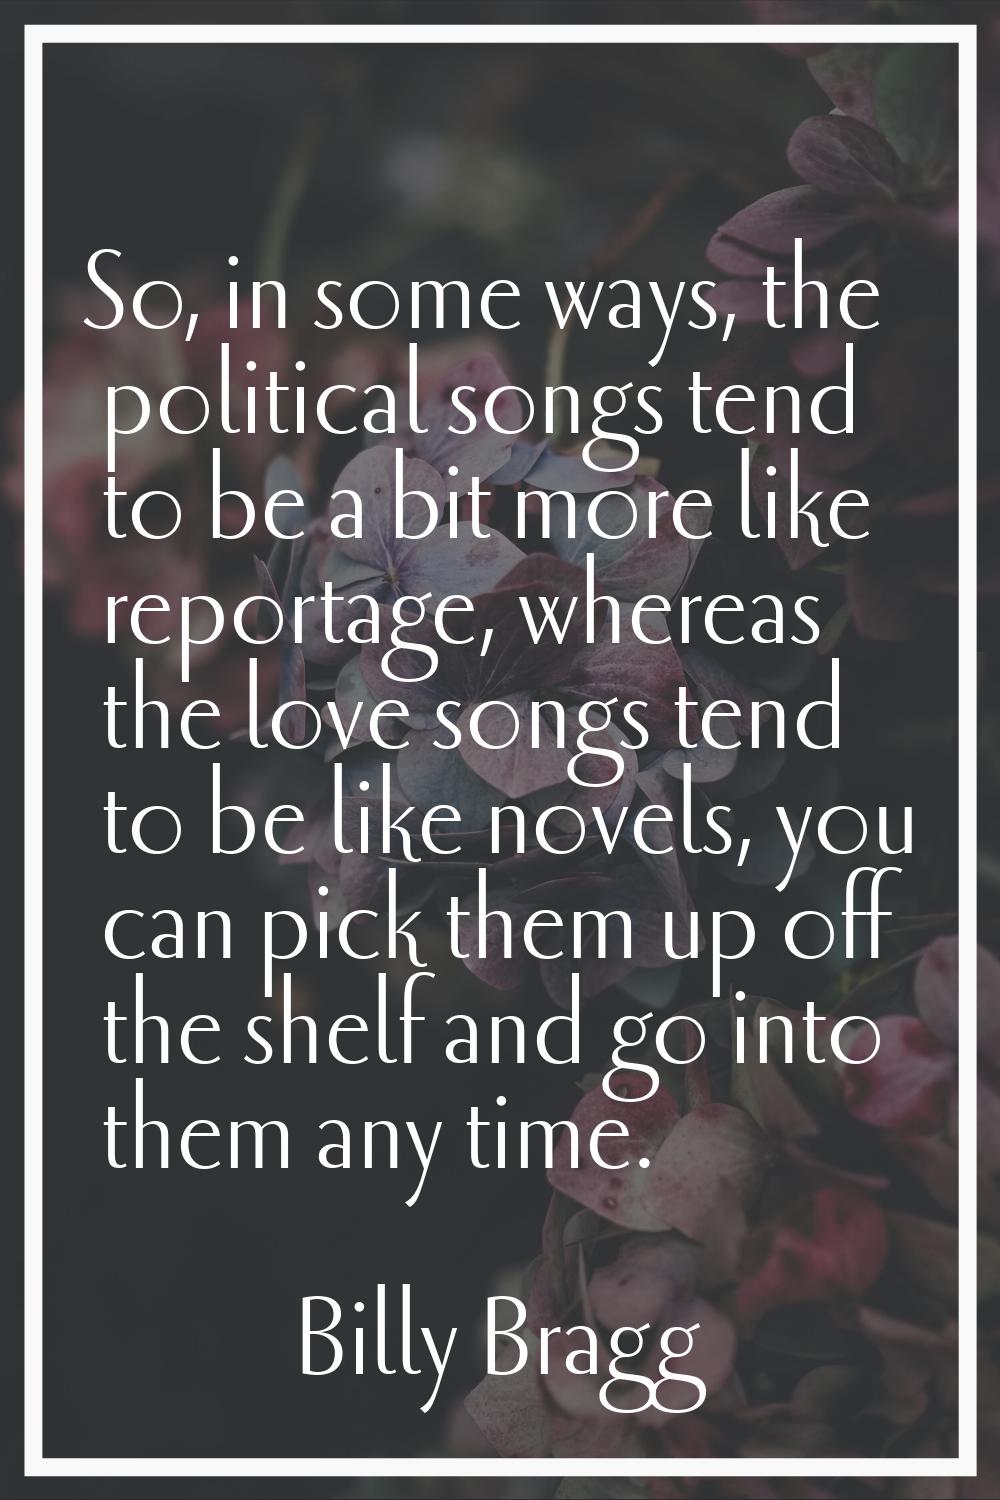 So, in some ways, the political songs tend to be a bit more like reportage, whereas the love songs 